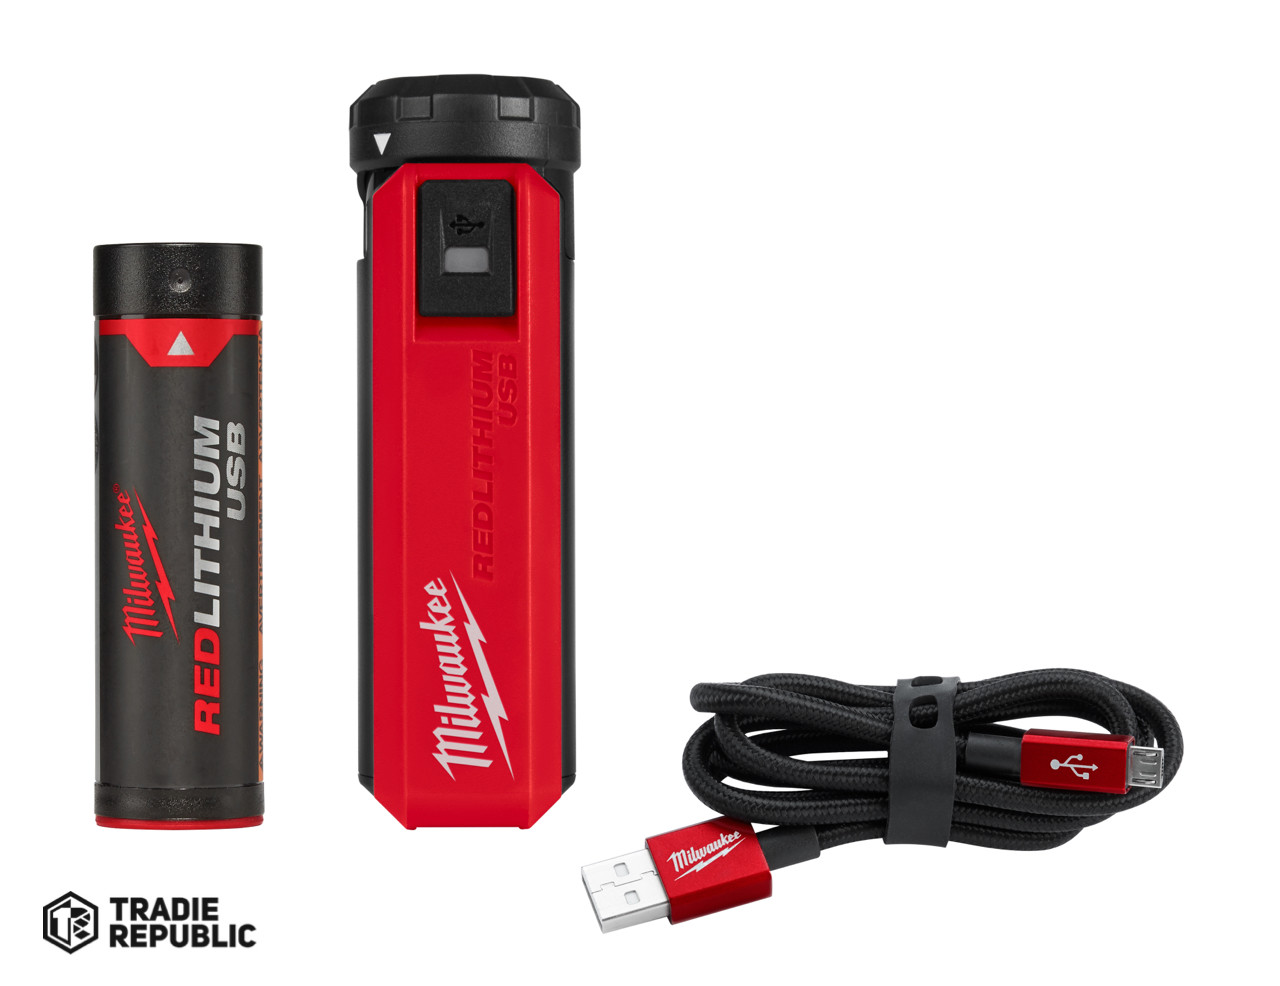 L4PPS-201 Milwaukee Usb Recharge Portble Power Source